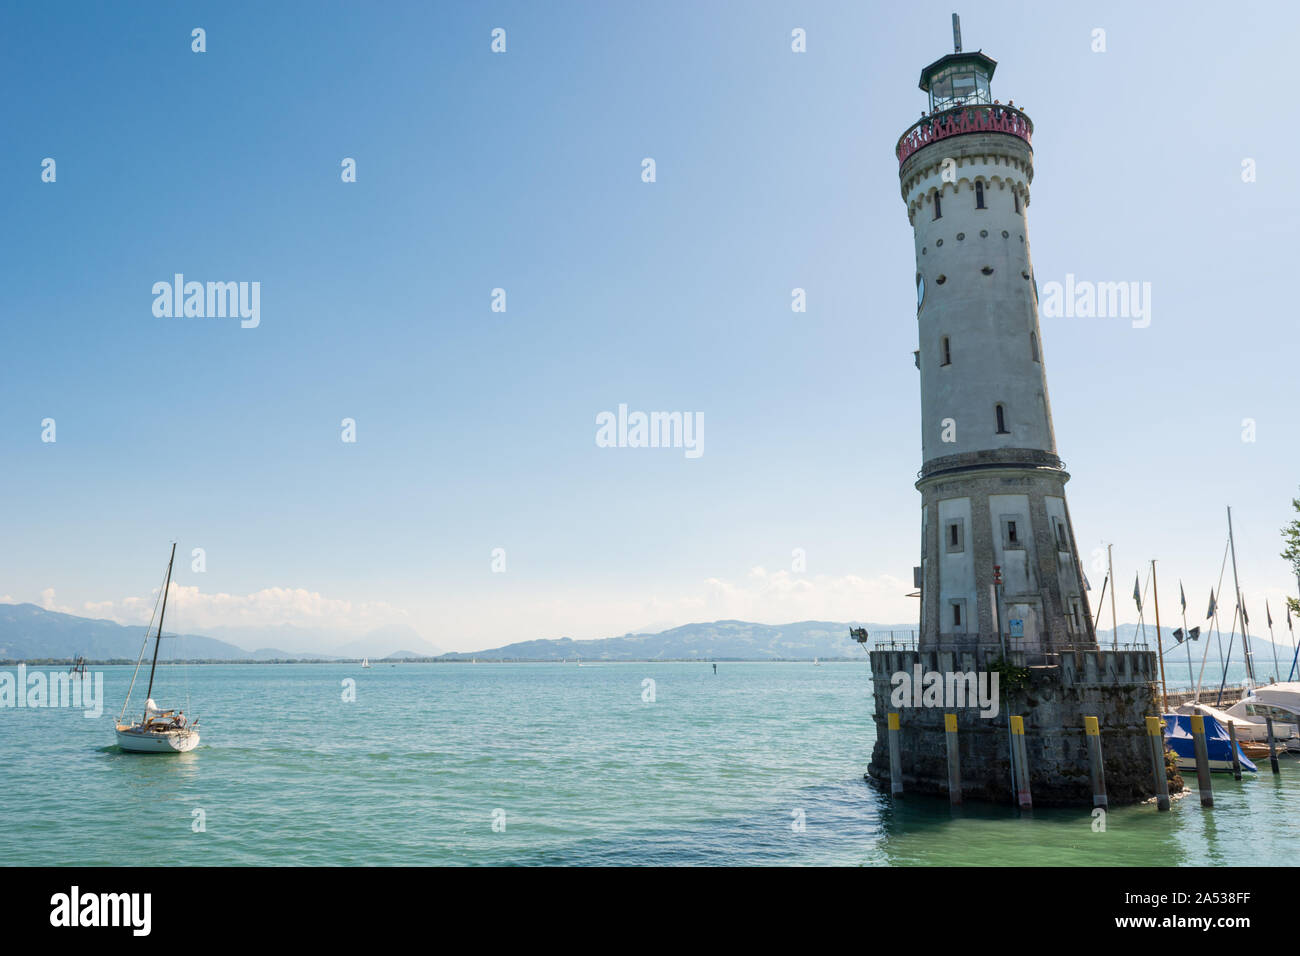 Lindau, Germany - July16: Picturesque port town Lindau on Lake Constance, on July 16, 2019 Lindau, Germany Stock Photo